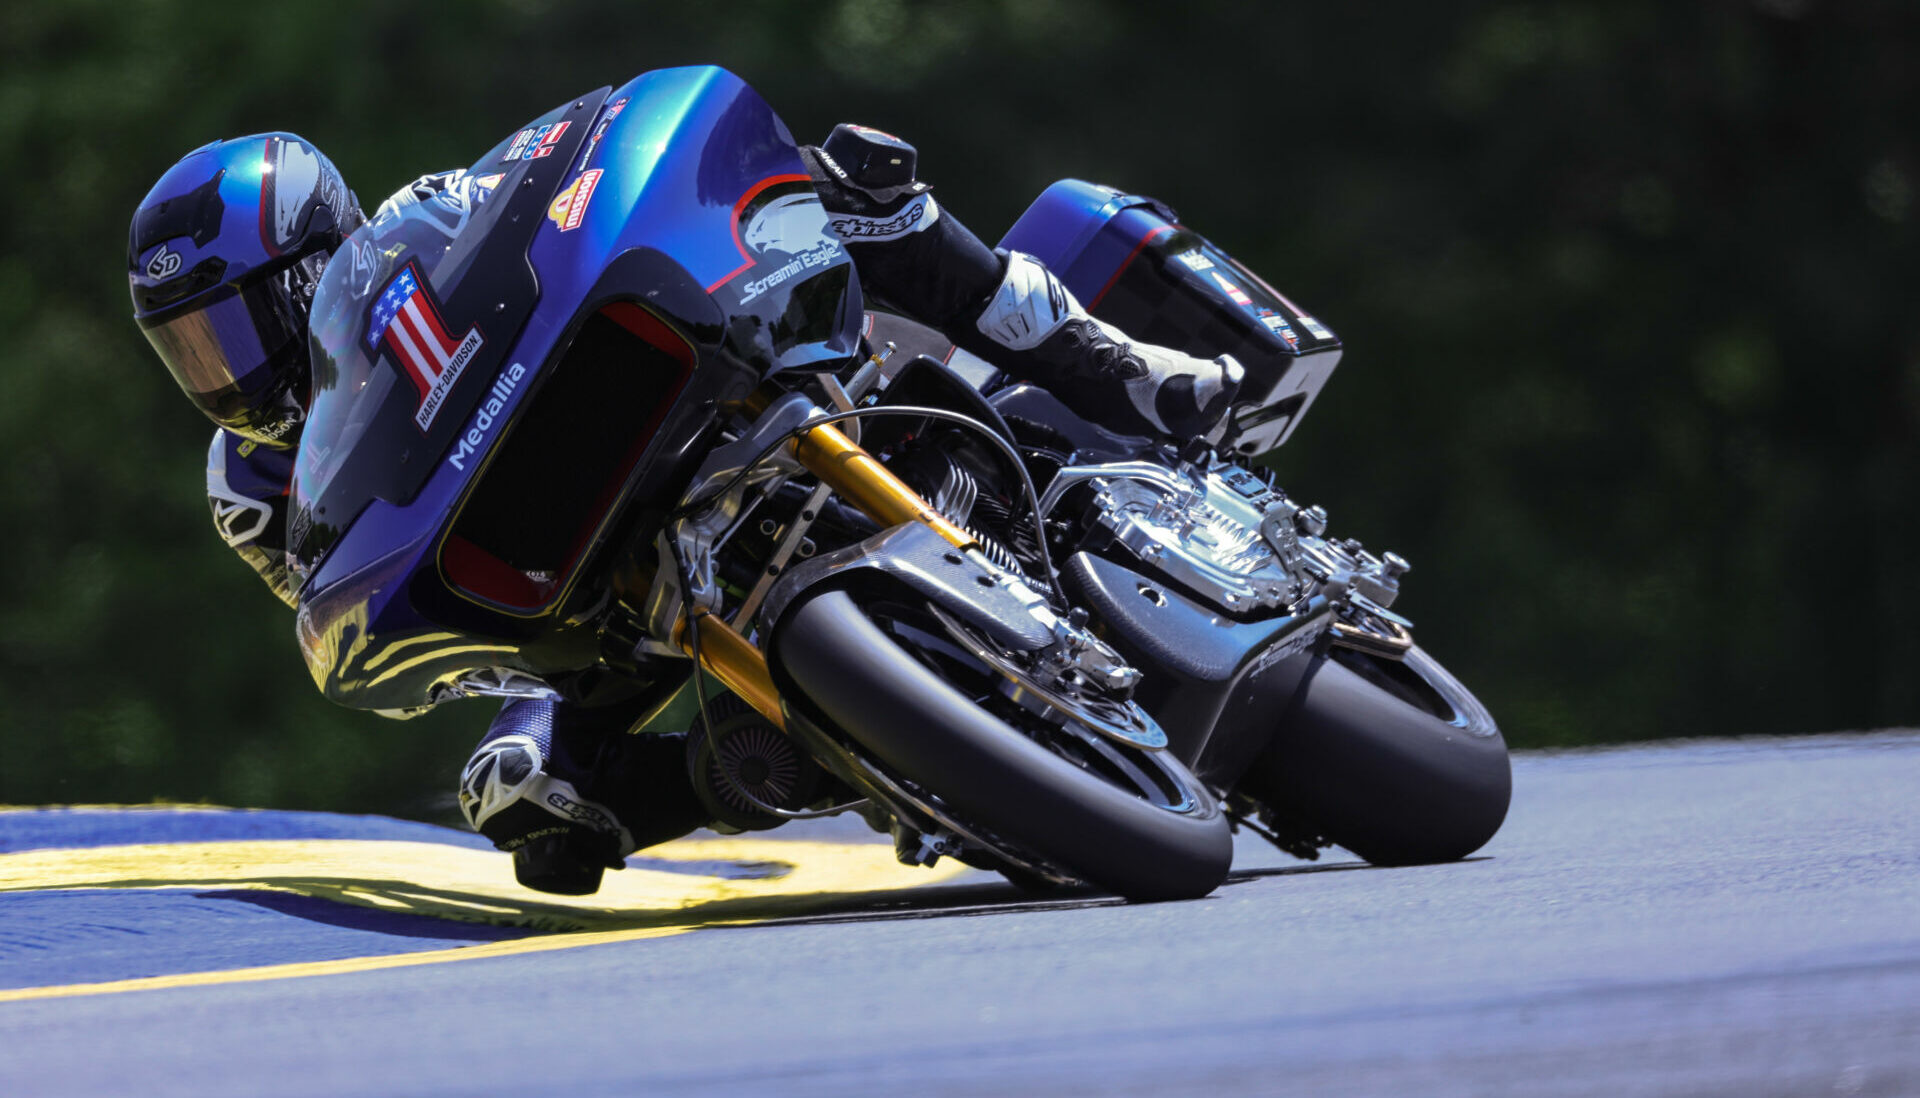 Kyle Wyman (1) at speed on his Screamin' Eagle Harley-Davidson Road Glide at Road Atlanta. Photo by Brian J. Nelson.